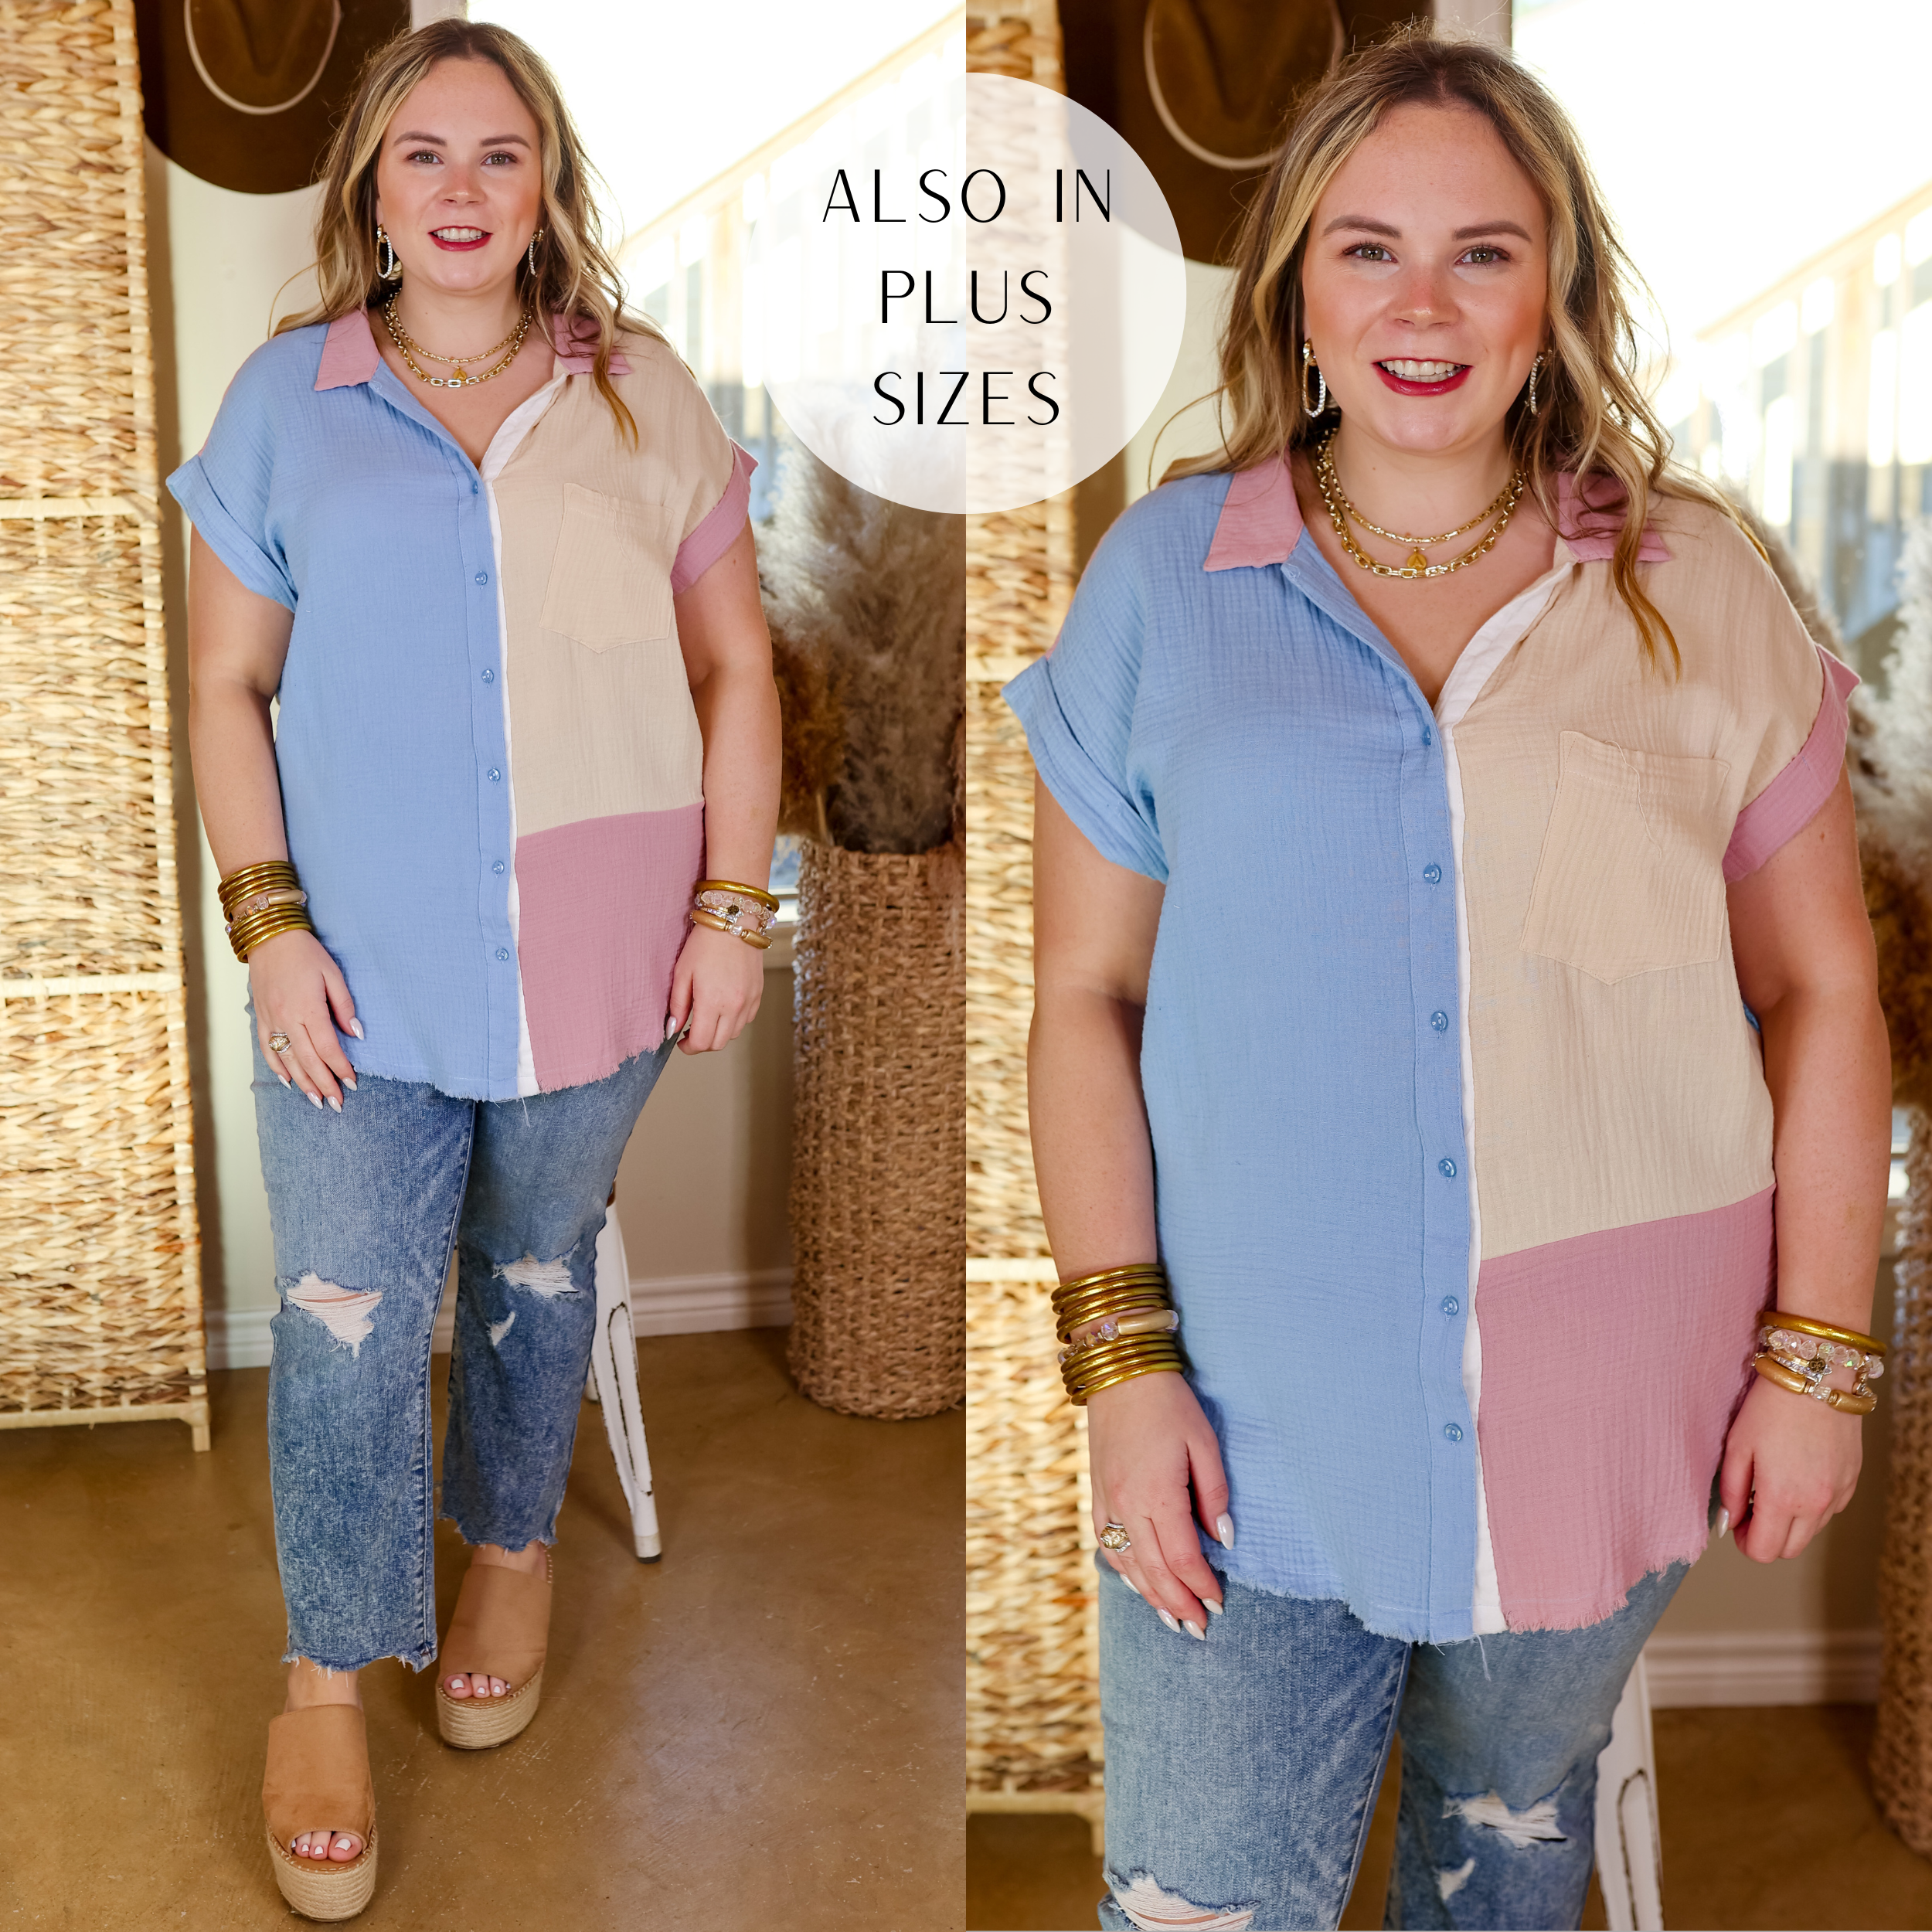 Model is wearing a button down color block top with a collar in baby blue, mauve, and pale yellow.  Model has this top paired with straight leg jeans, wedges, and gold jewelry. 